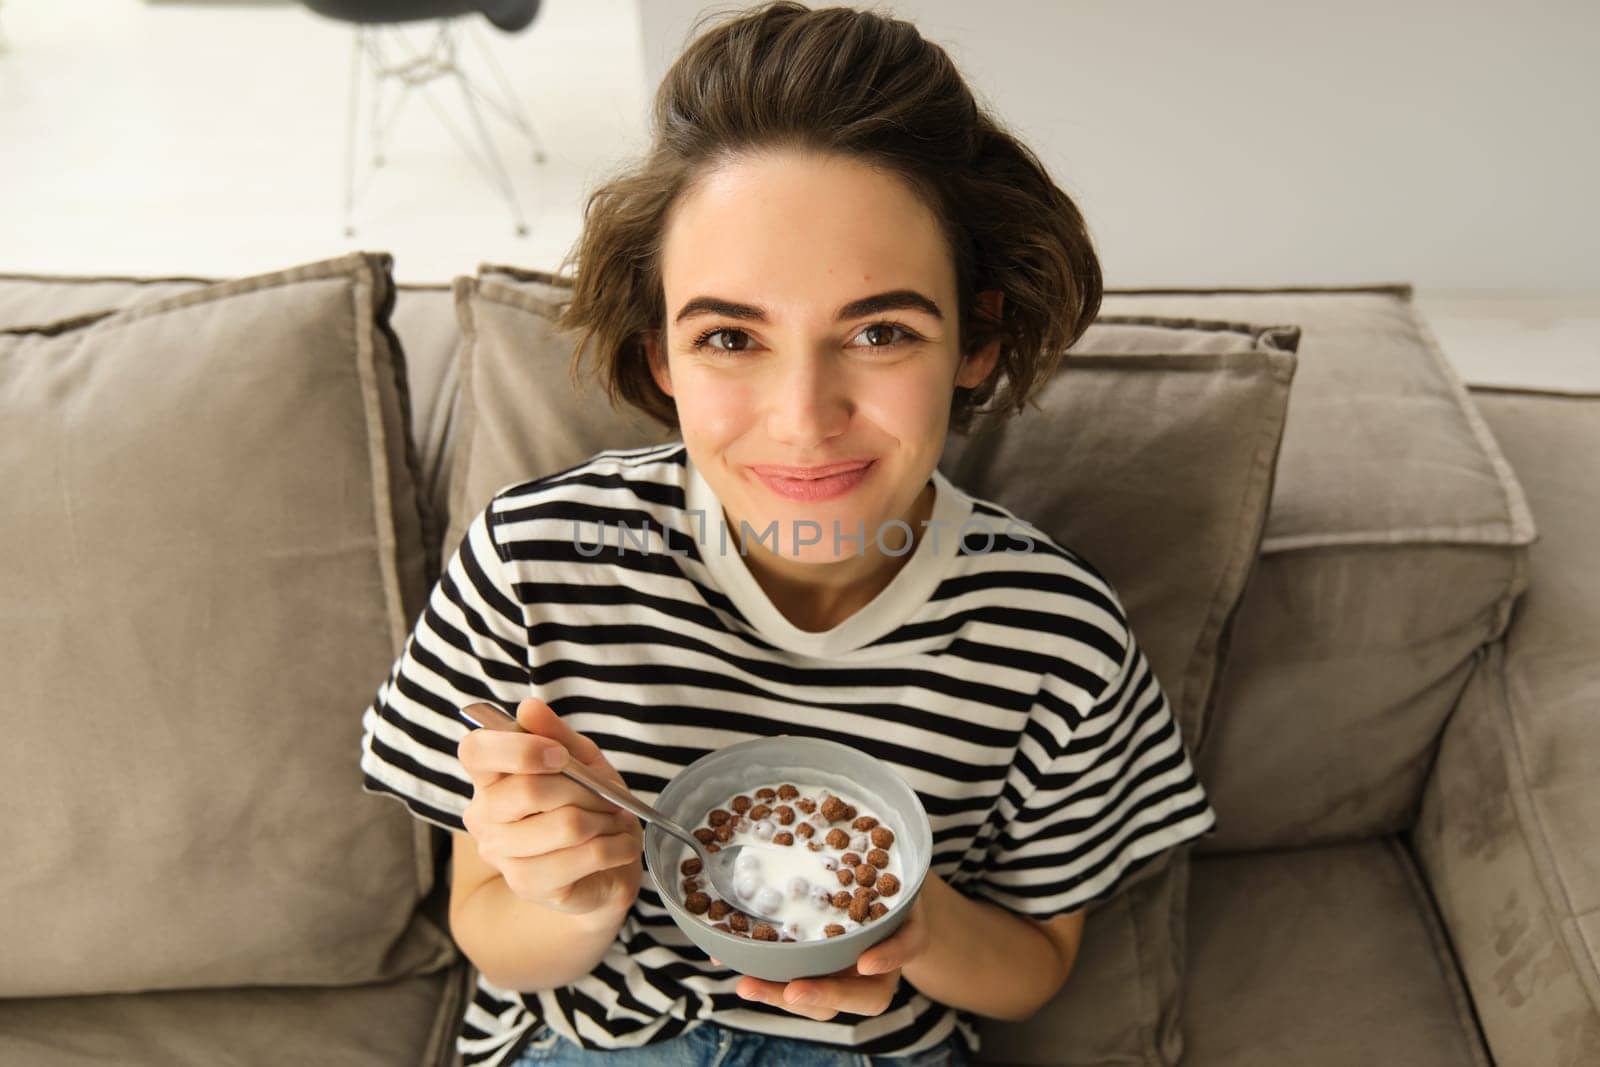 Close up of cute young female model, eating cereals with milk, enjoys her breakfast on sofa in living room, smiling and looking happy. People and food concept